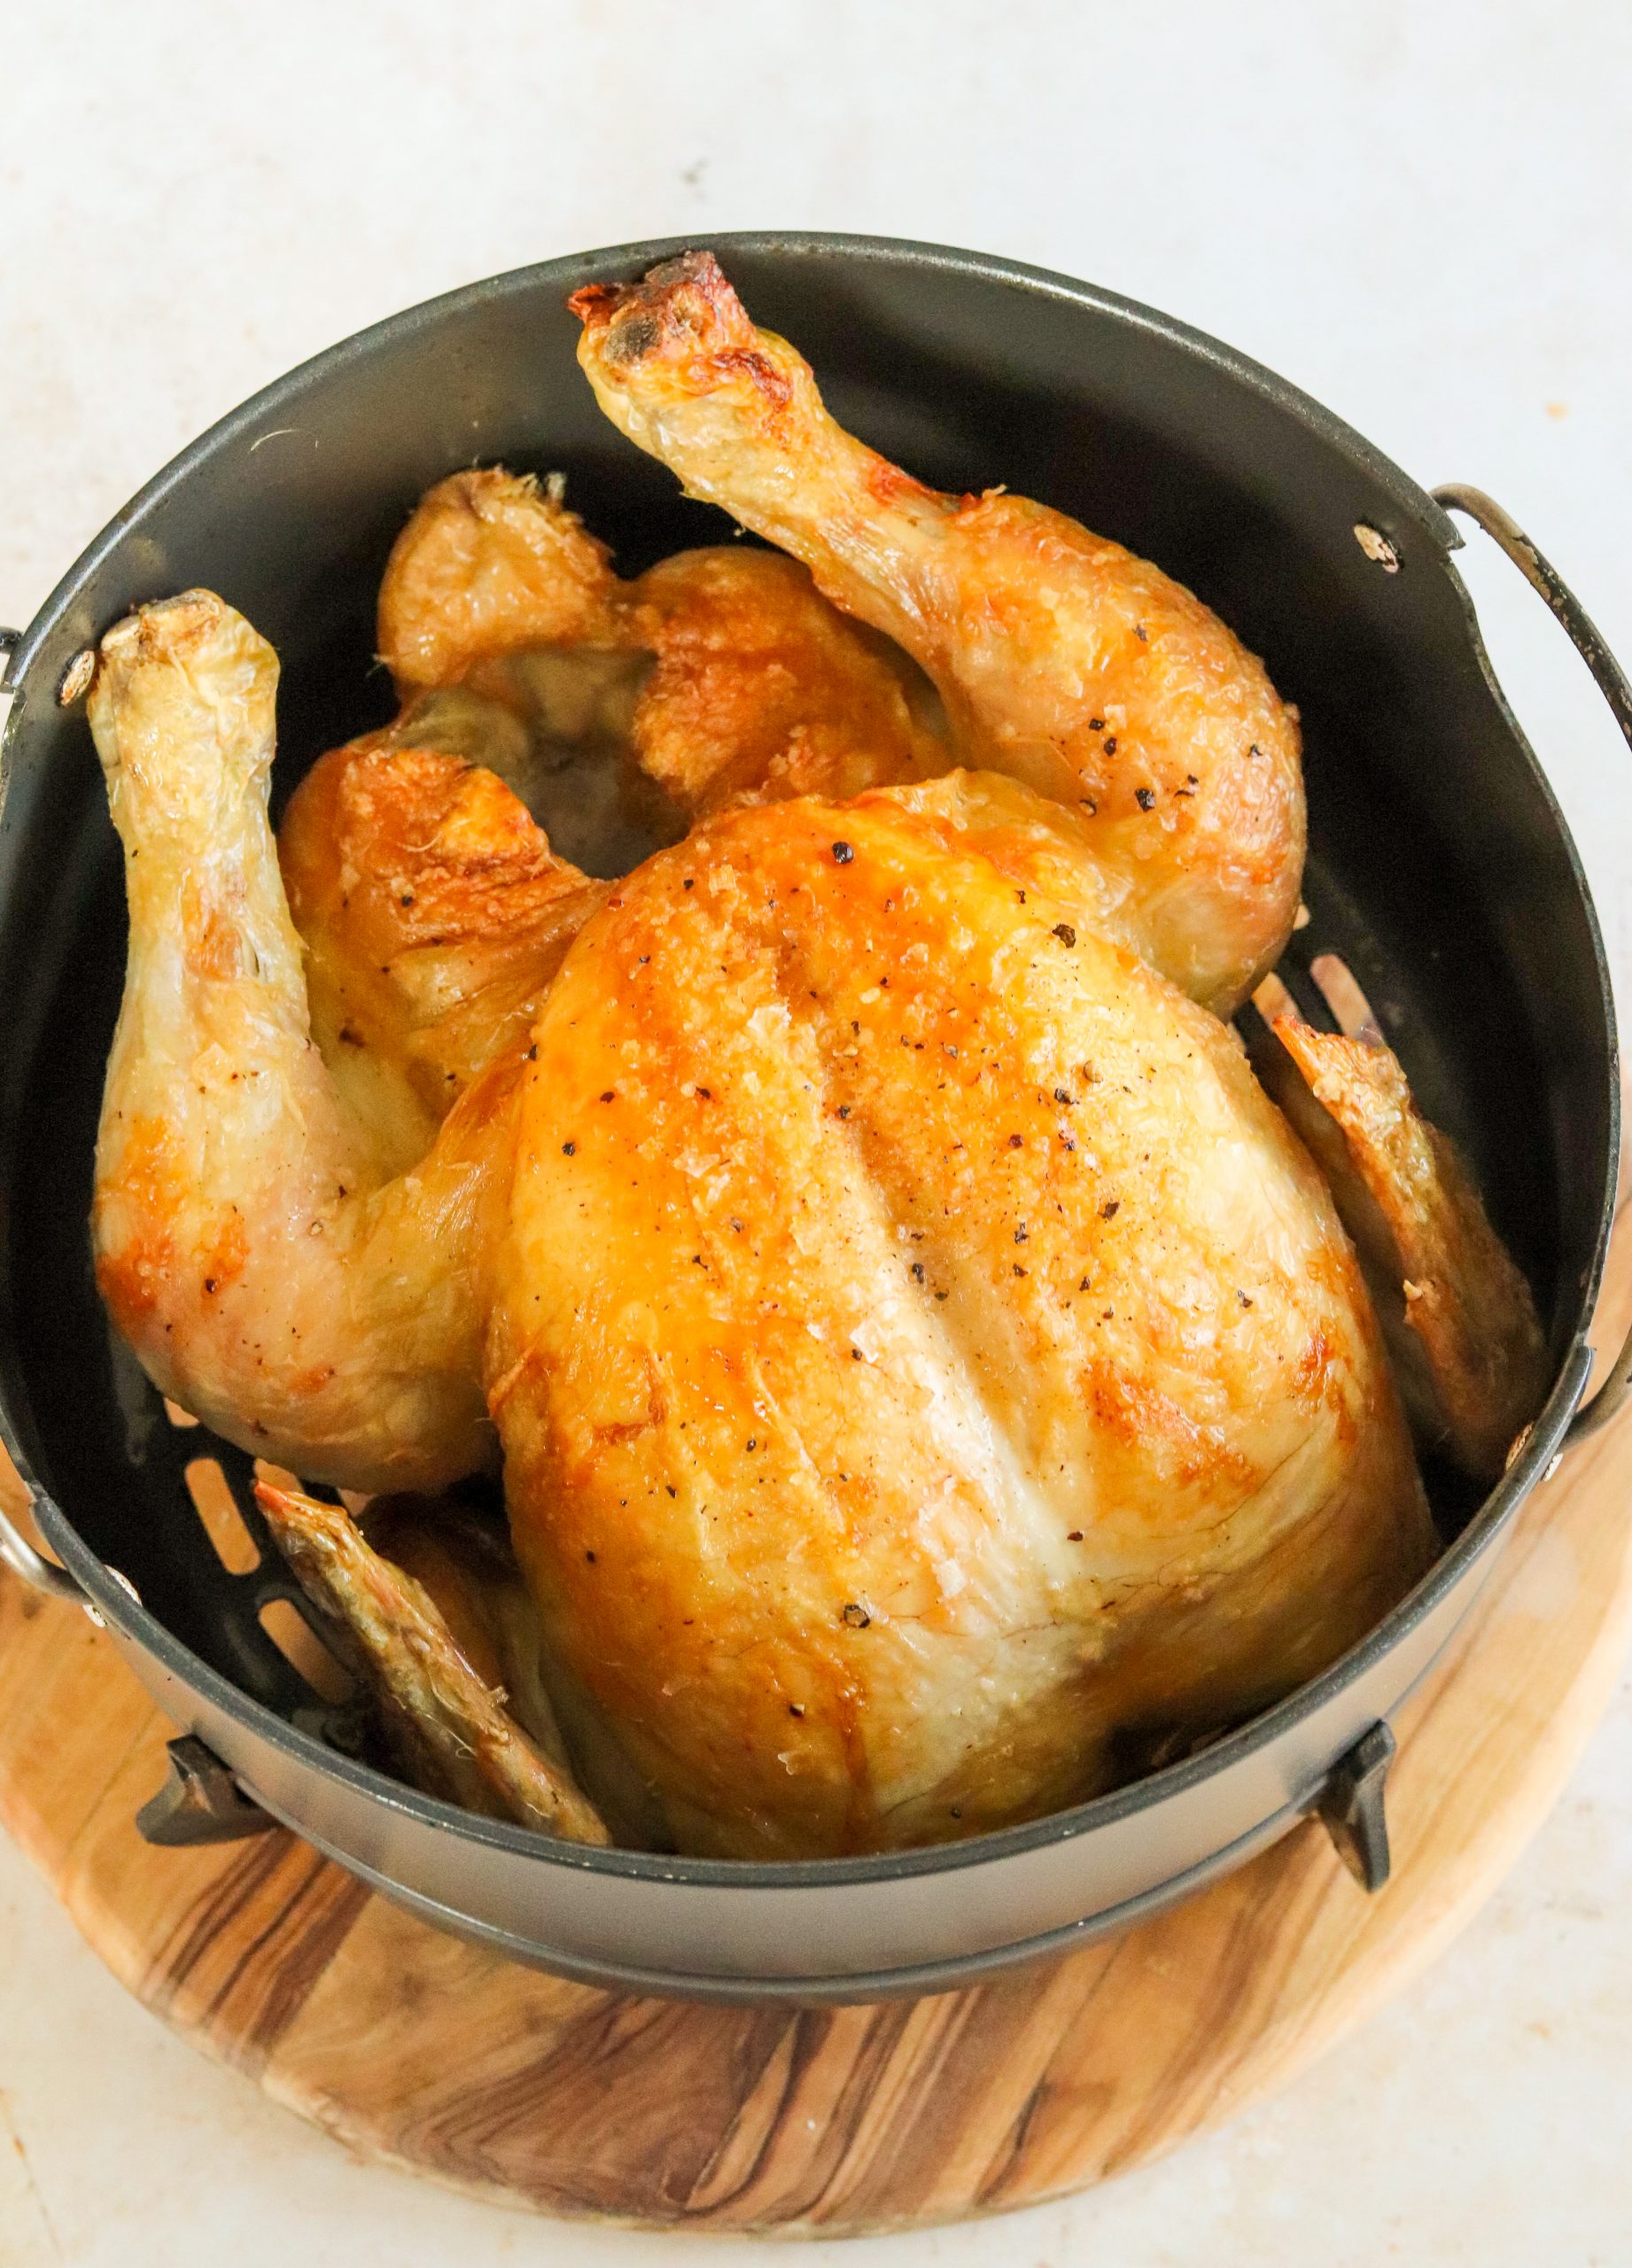 https://www.curlyscooking.co.uk/wp-content/uploads/2022/11/Simple-Air-Fryer-Whole-Roast-Chicken-15-scaled.jpg